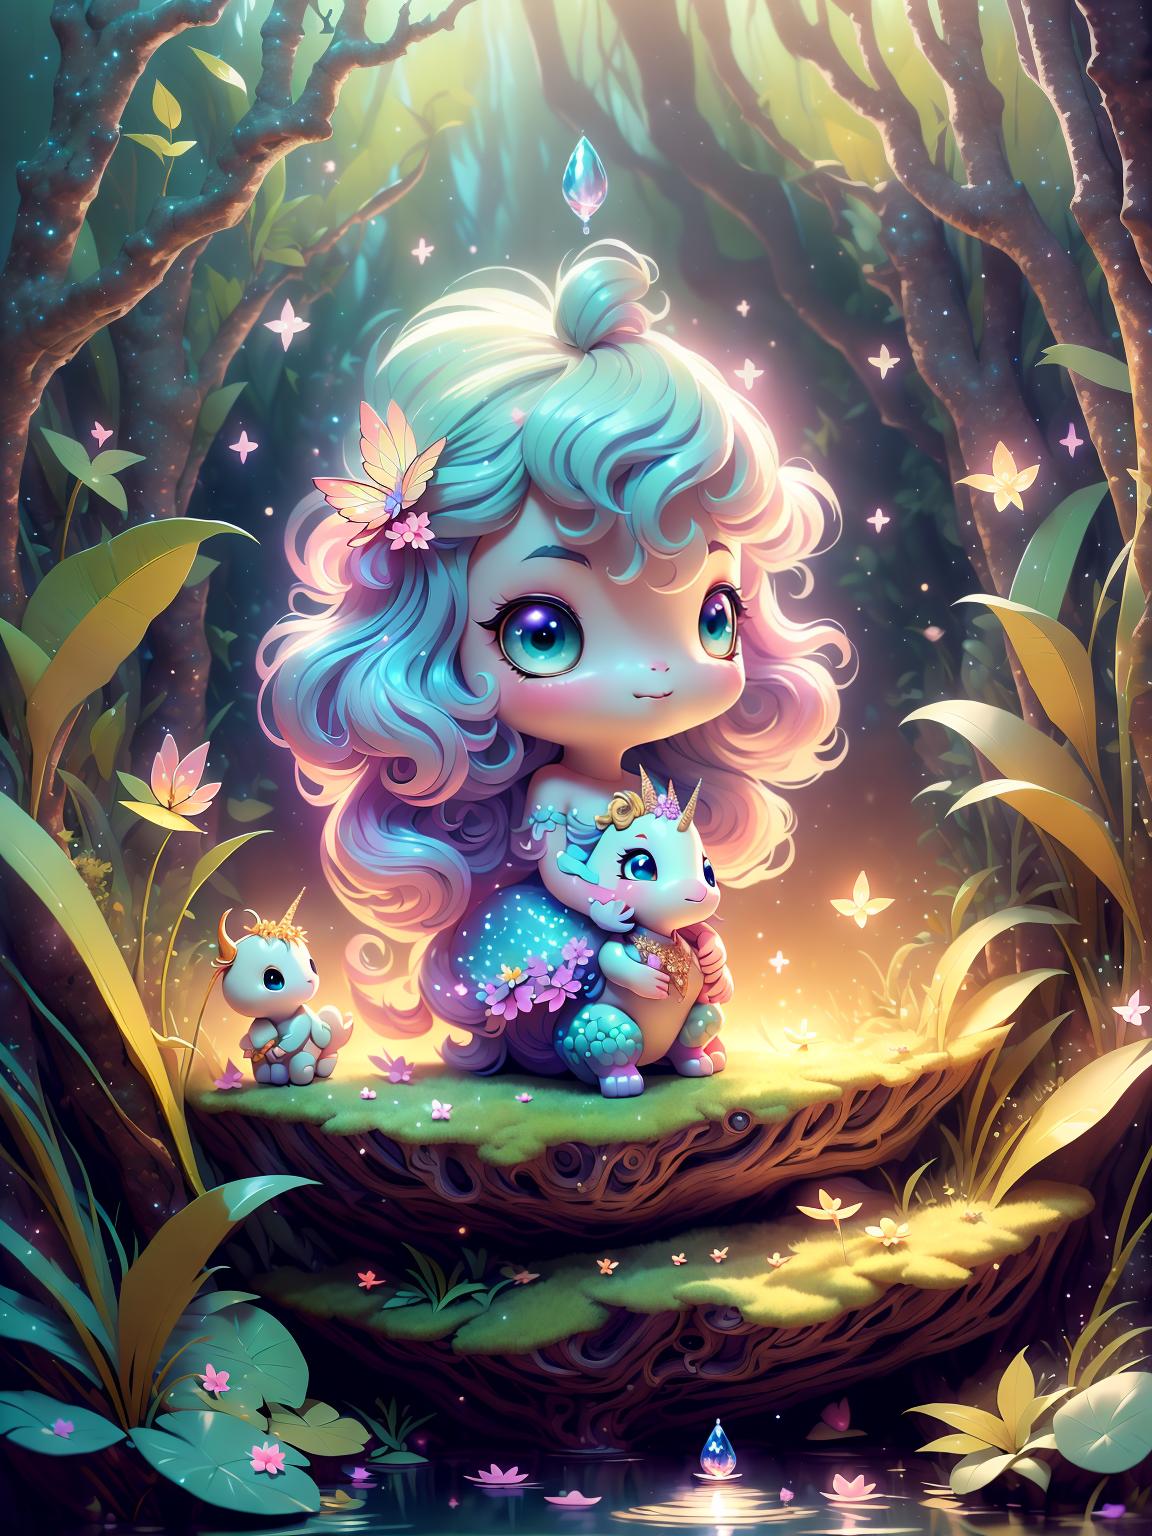  master piece, best quality, ultra detailed, highres, 4k.8k, An ethereal woman, Gently stroking the unicorn's mane, radiating a sense of wonder, Serene and captivated, BREAK A mystical encounter with a unicorn in a dreamlike world., Enchanted forest glade, Wildflowers, shimmering butterflies, and a glowing crystal pond, BREAK Enchanting and tranquil, Soft pastel colors and a dreamy aura, Cu73Cre4ture